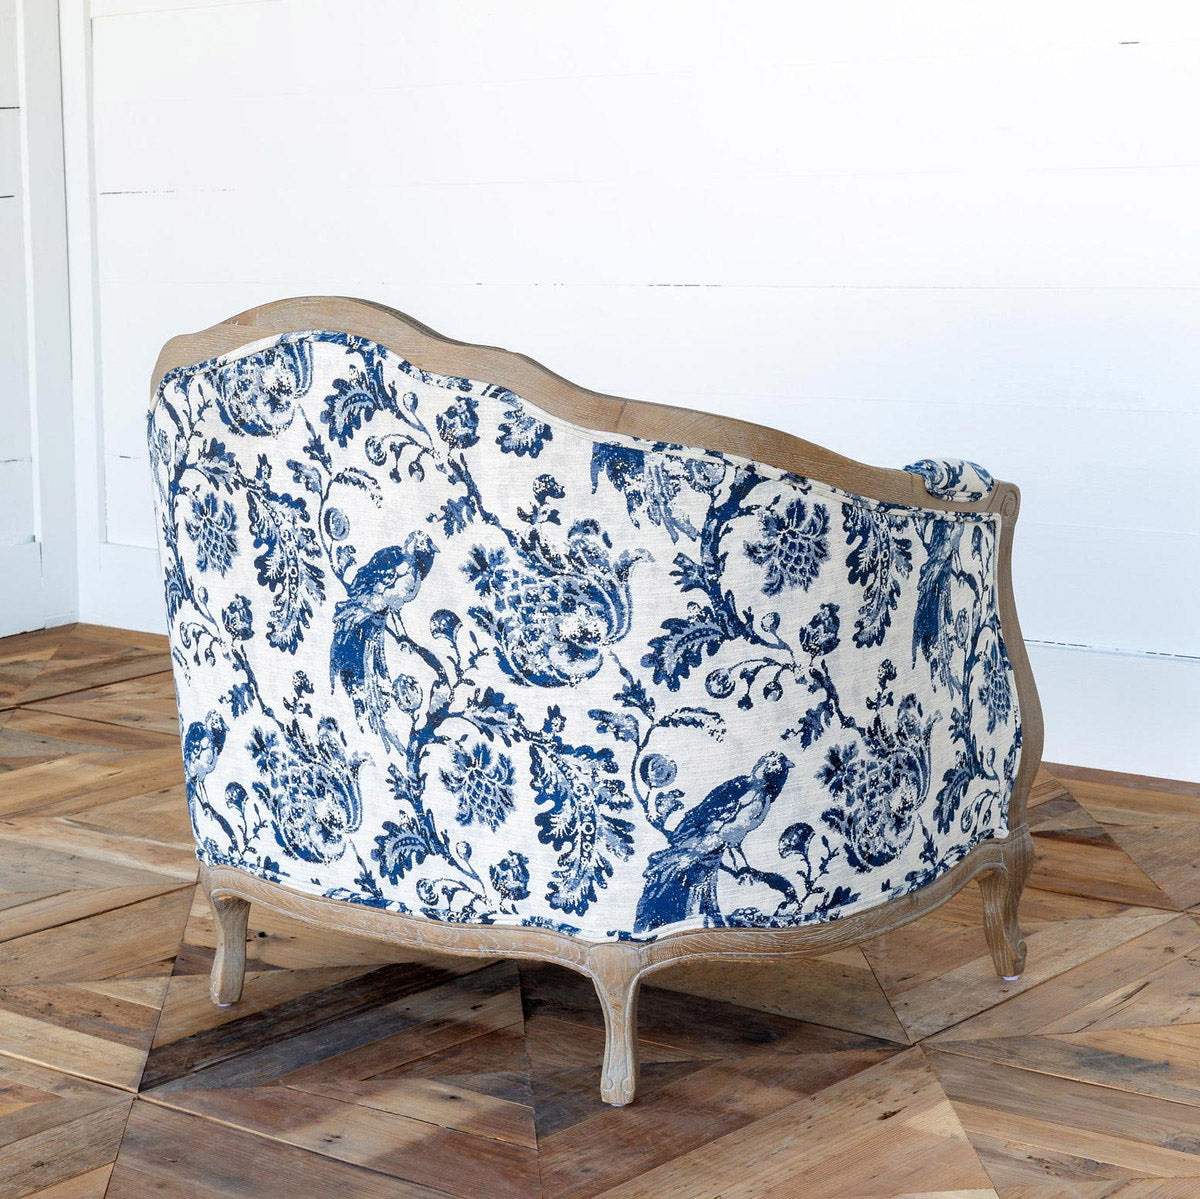 Bluebird Toile Settee- More Coming Soon!